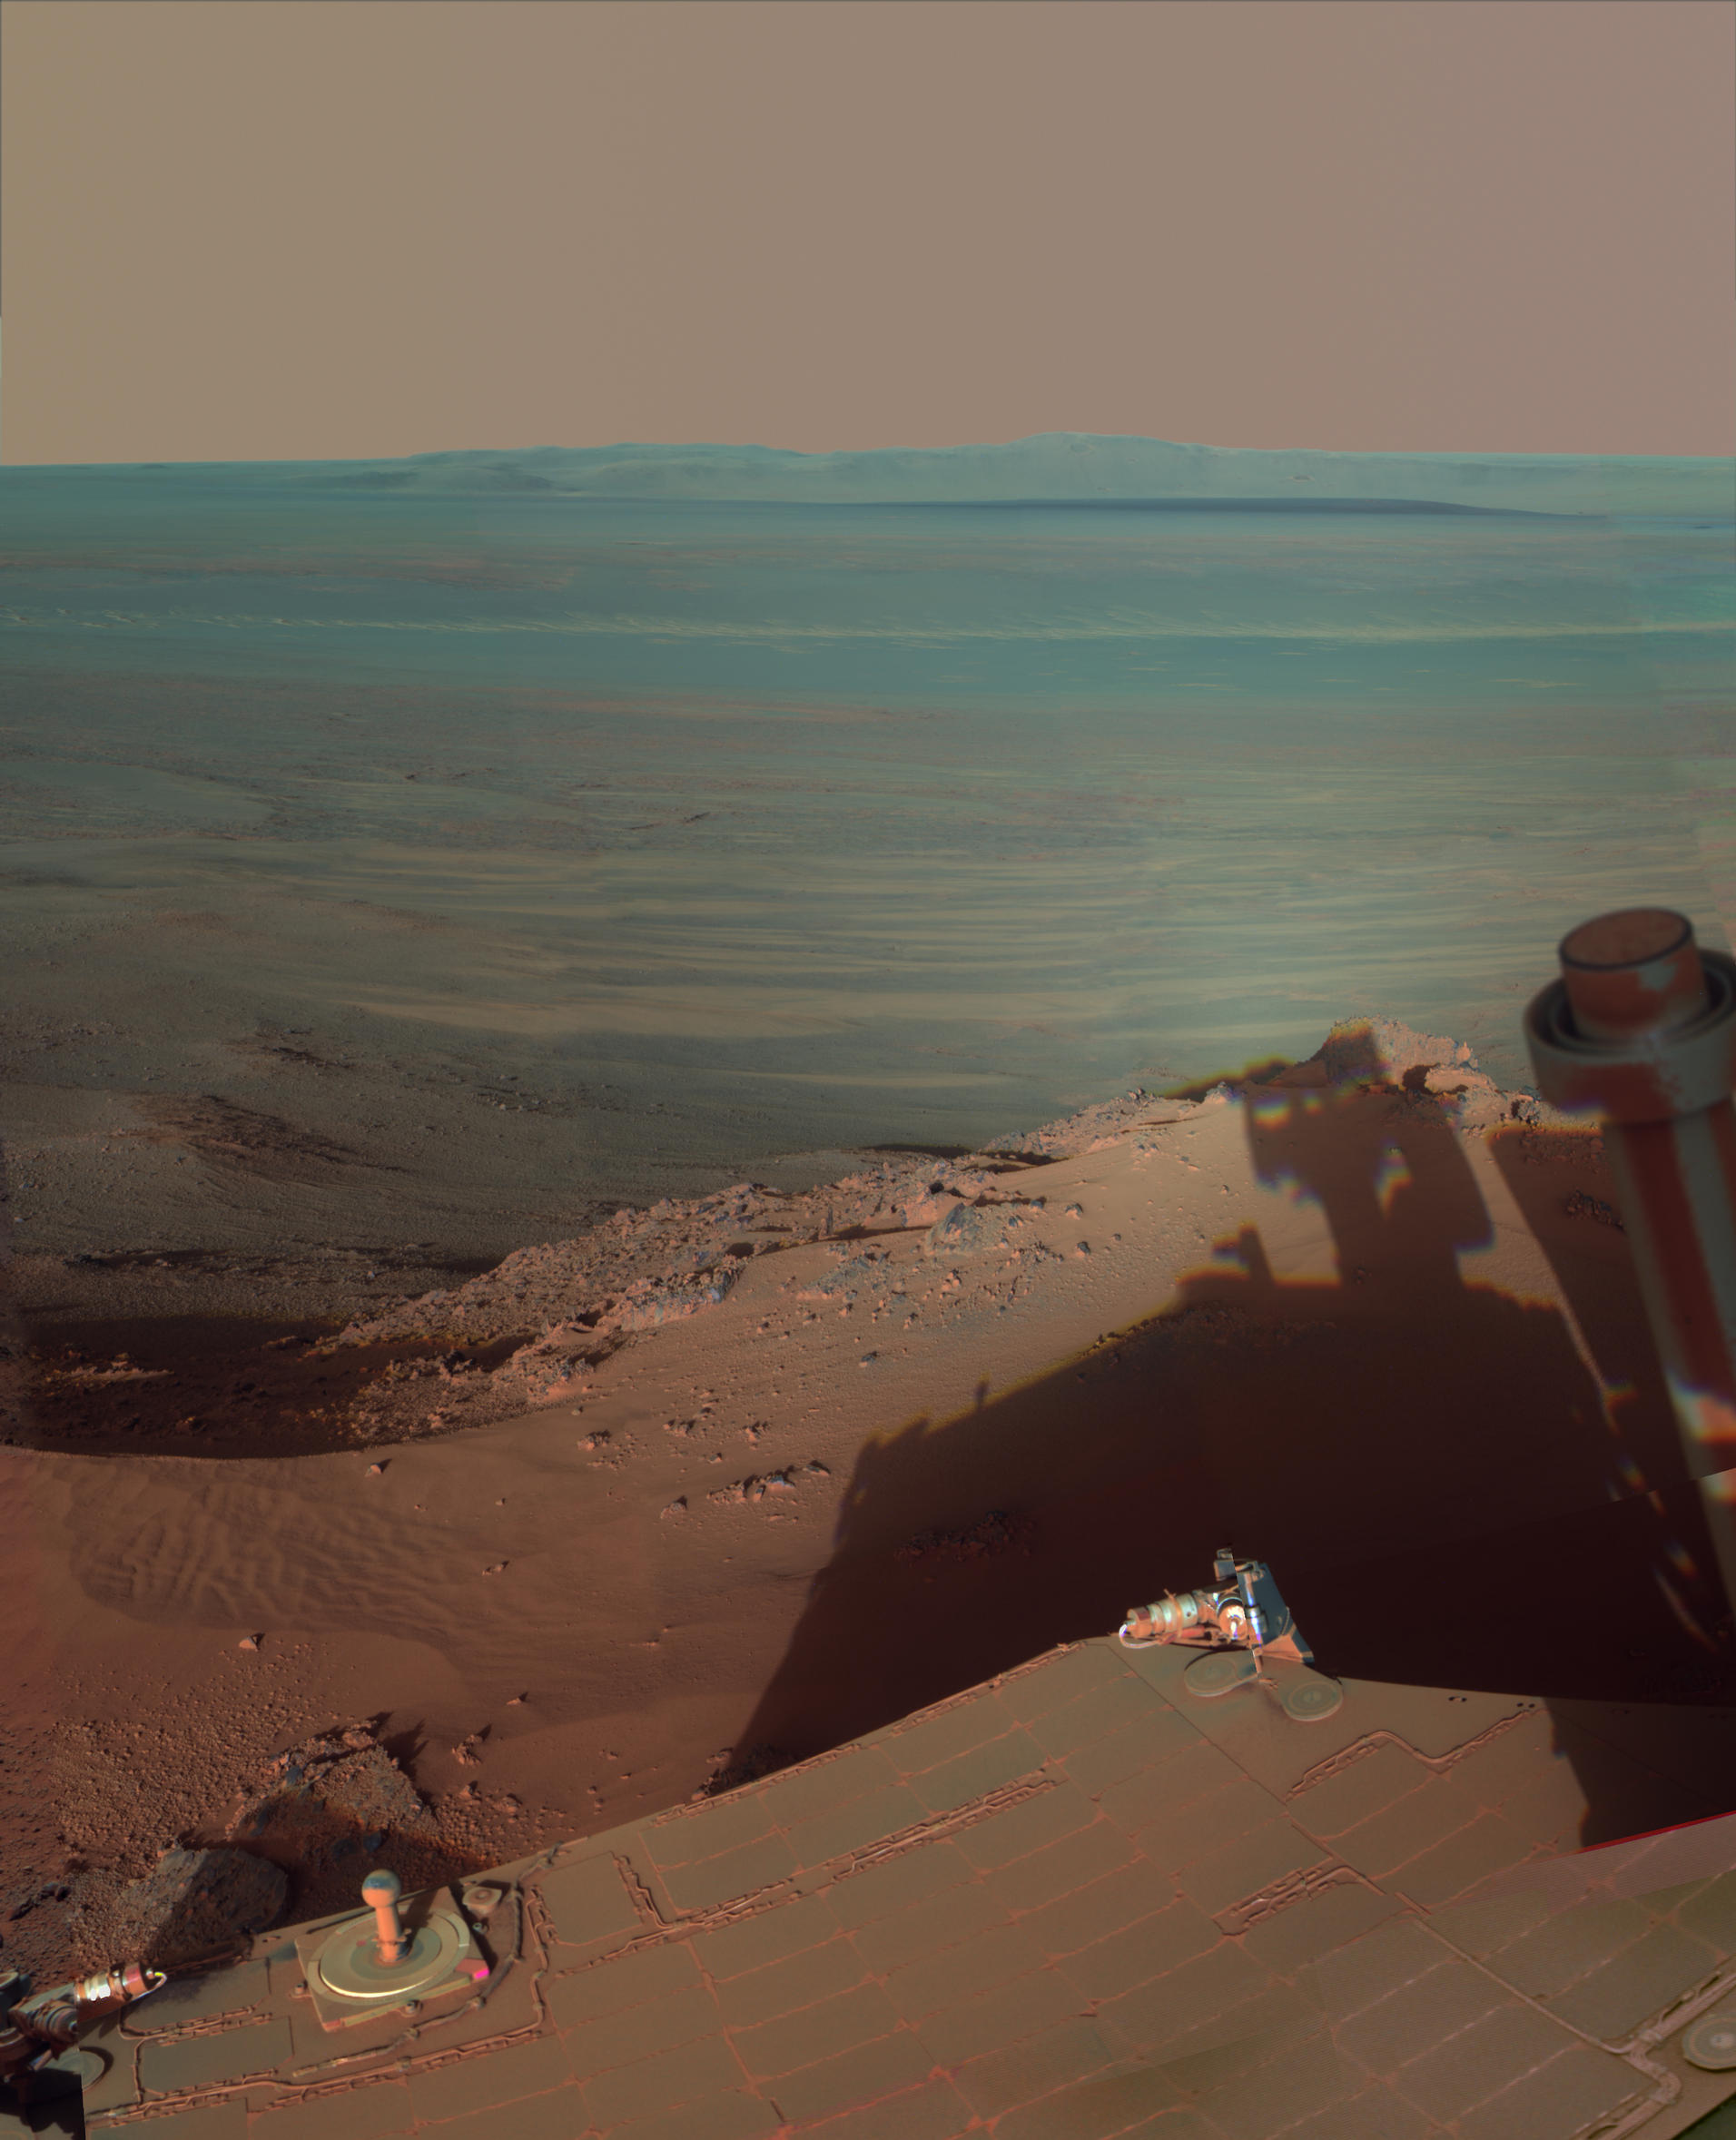 Late Afternoon Shadows at Endeavour Crater on Mars